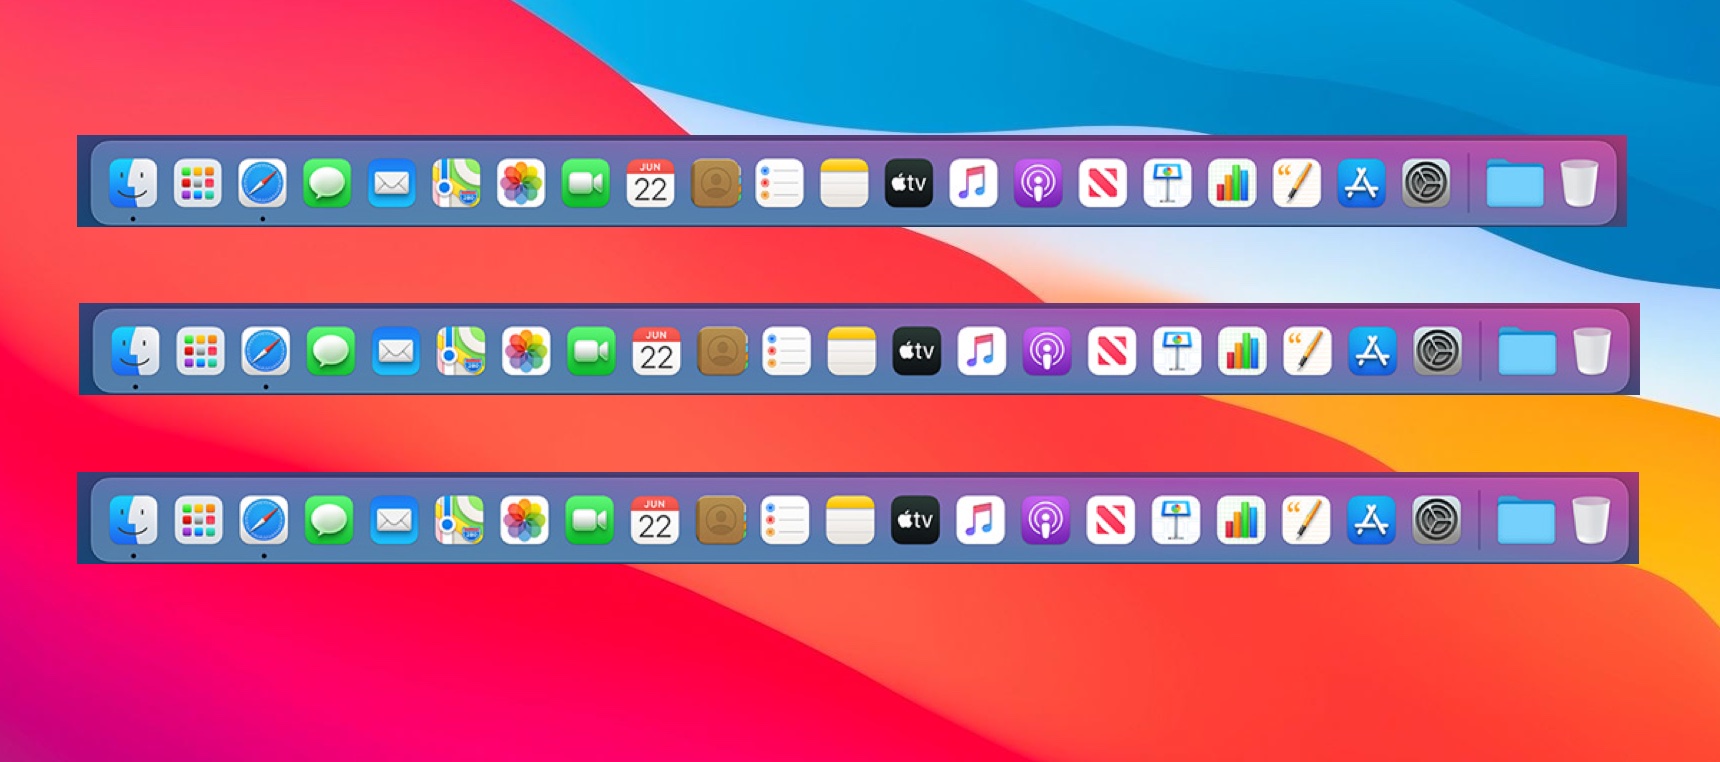 Can I Show the Dock on All Screens on Mac? Using Dock on Different Displays in macOS